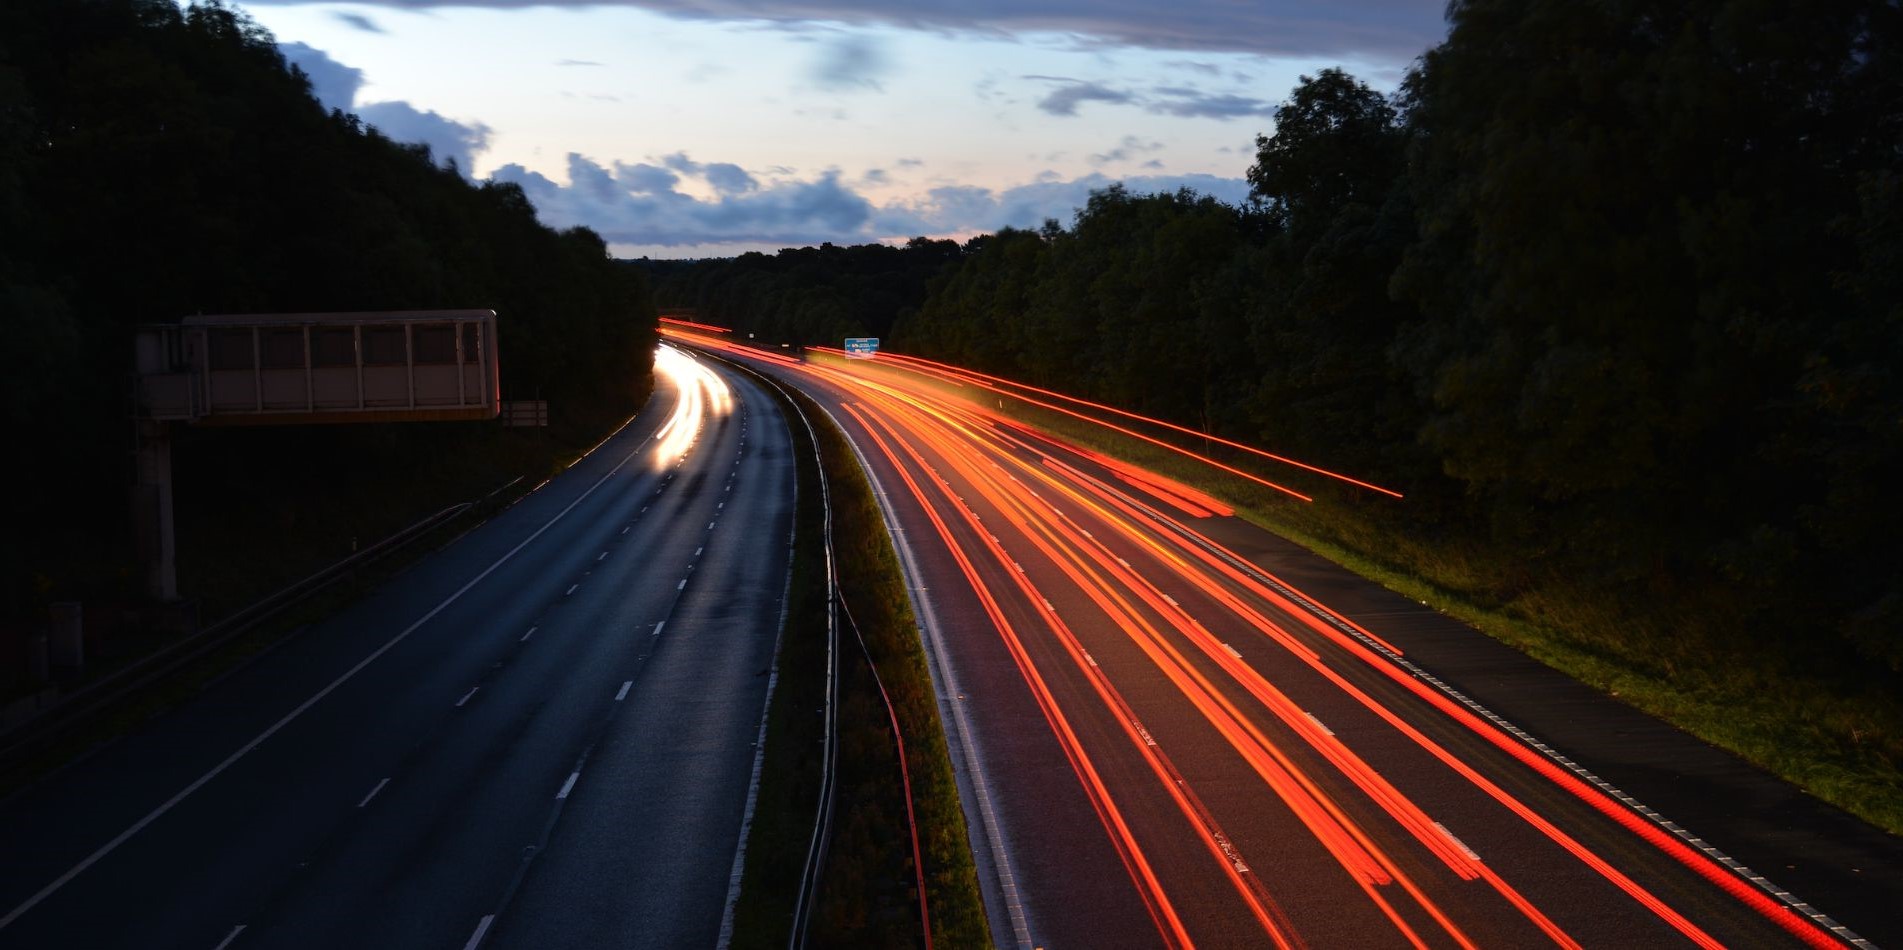 Asphalt-IQ Provides Total Solutions for the Carbon Management of All Highways Projects